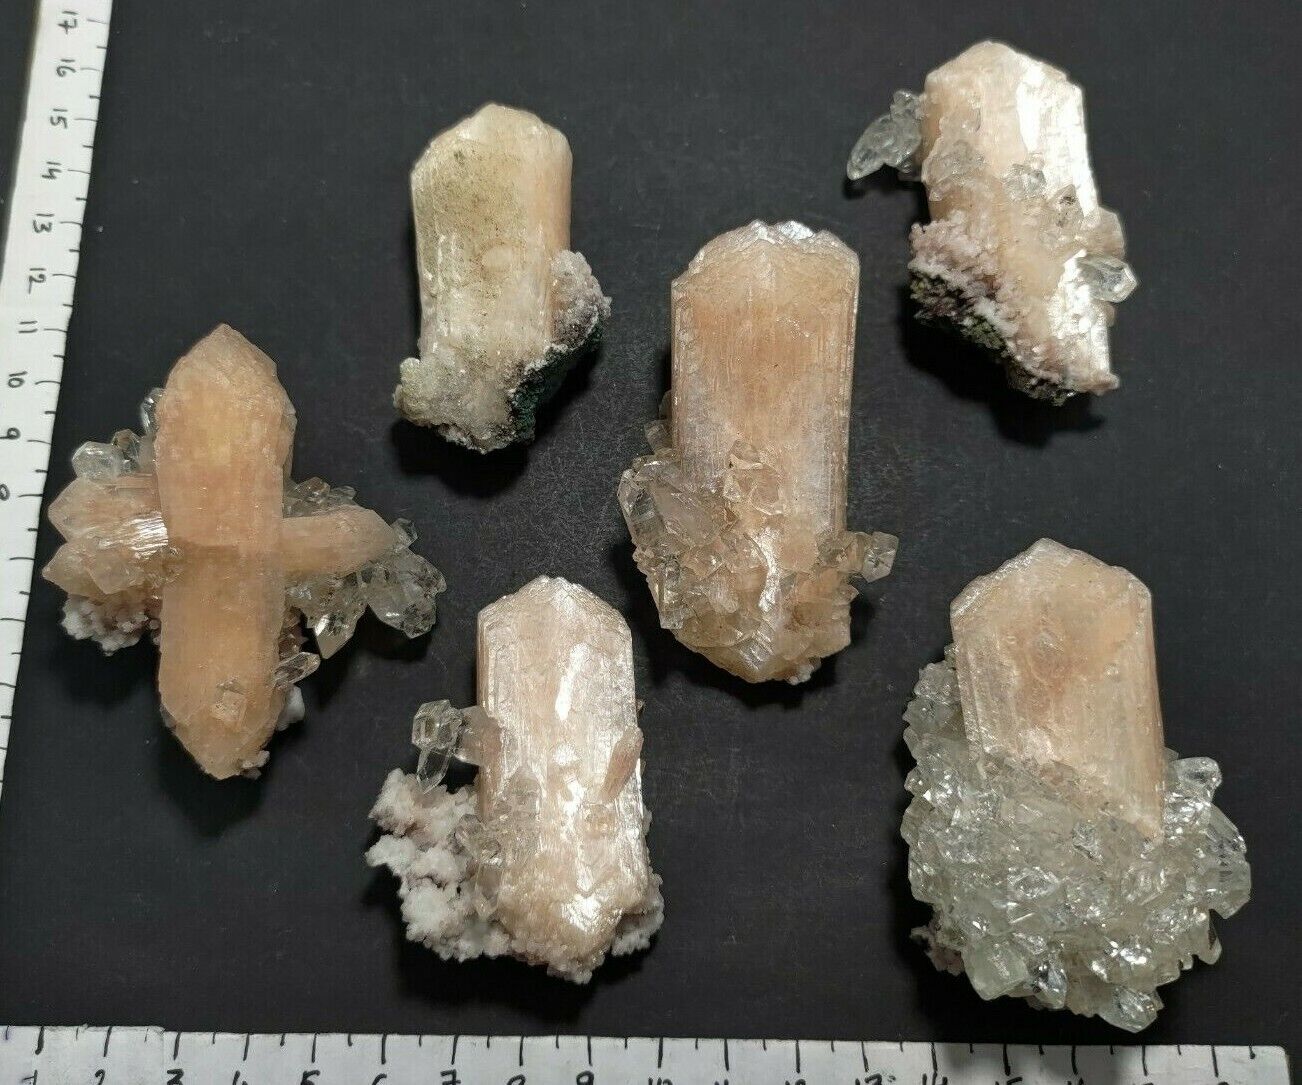 top point apophyllite cluster tips with stilbite on chalcedony crystal lot 1319